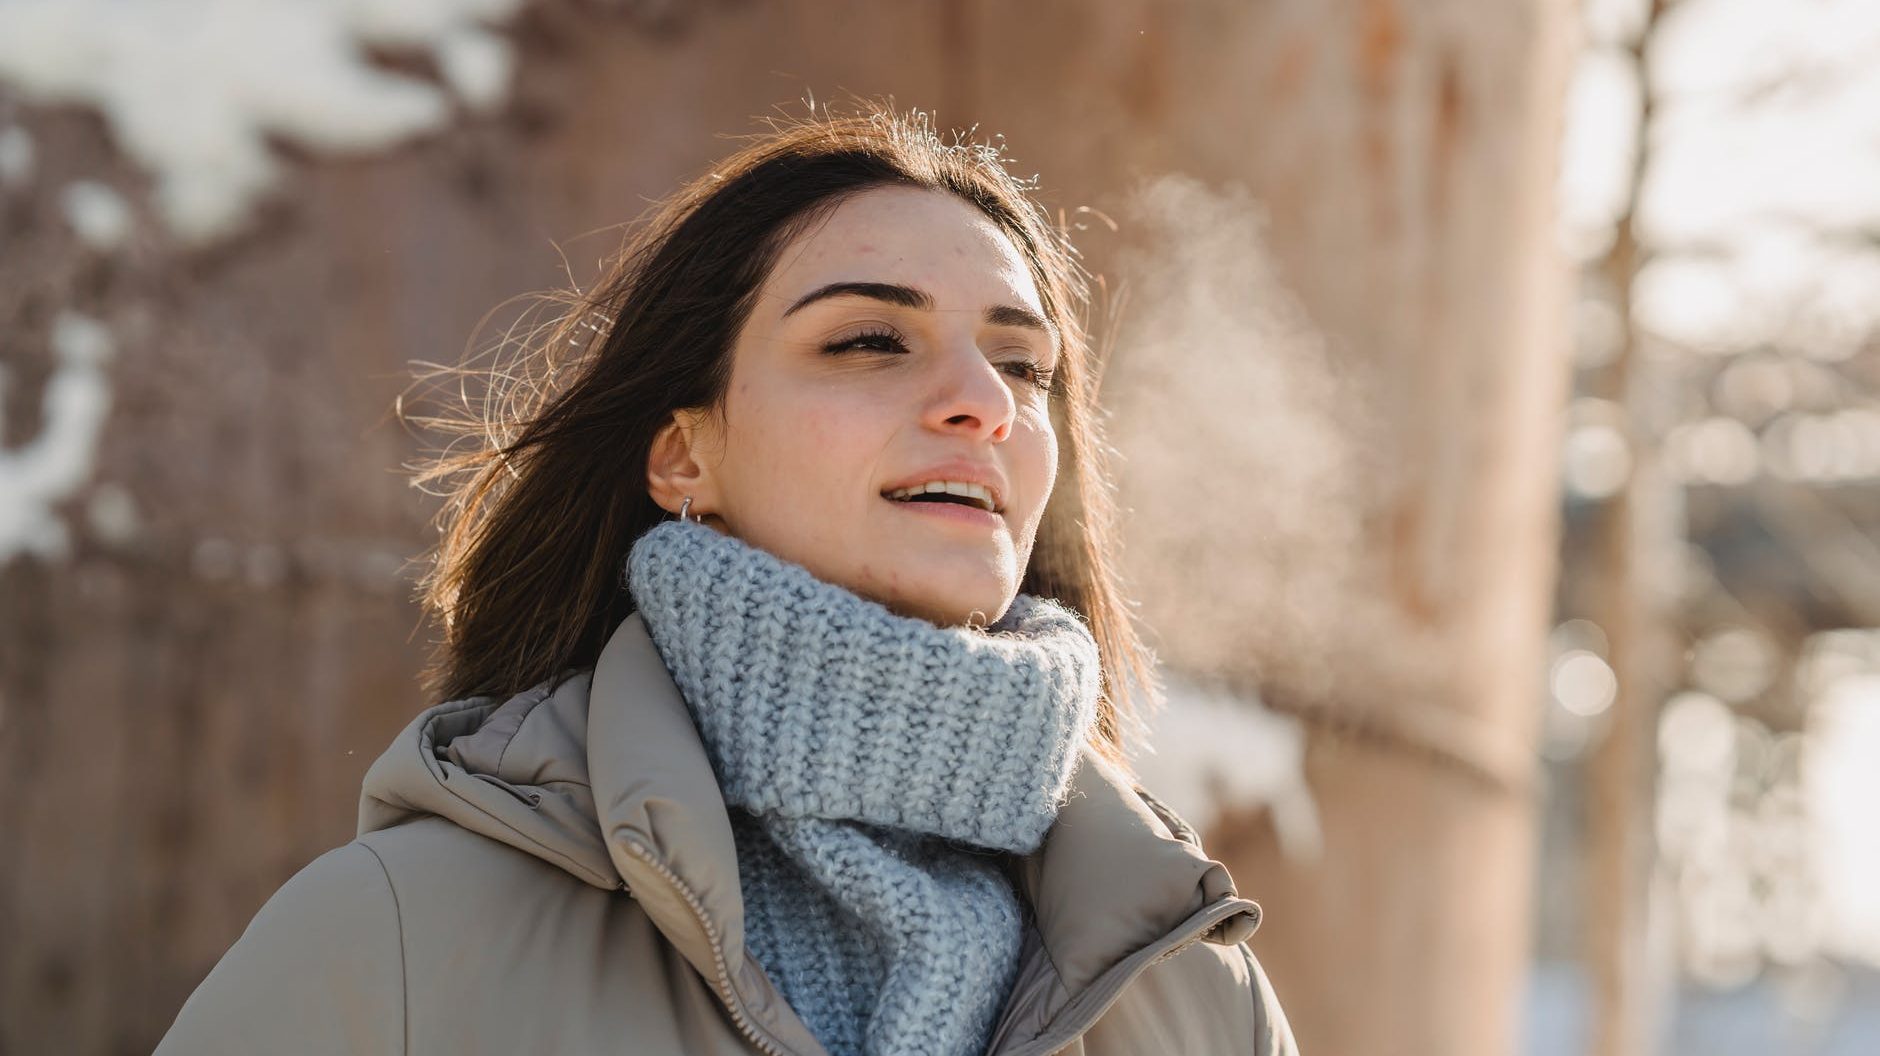 young woman exhaling steam on freezing cold weather